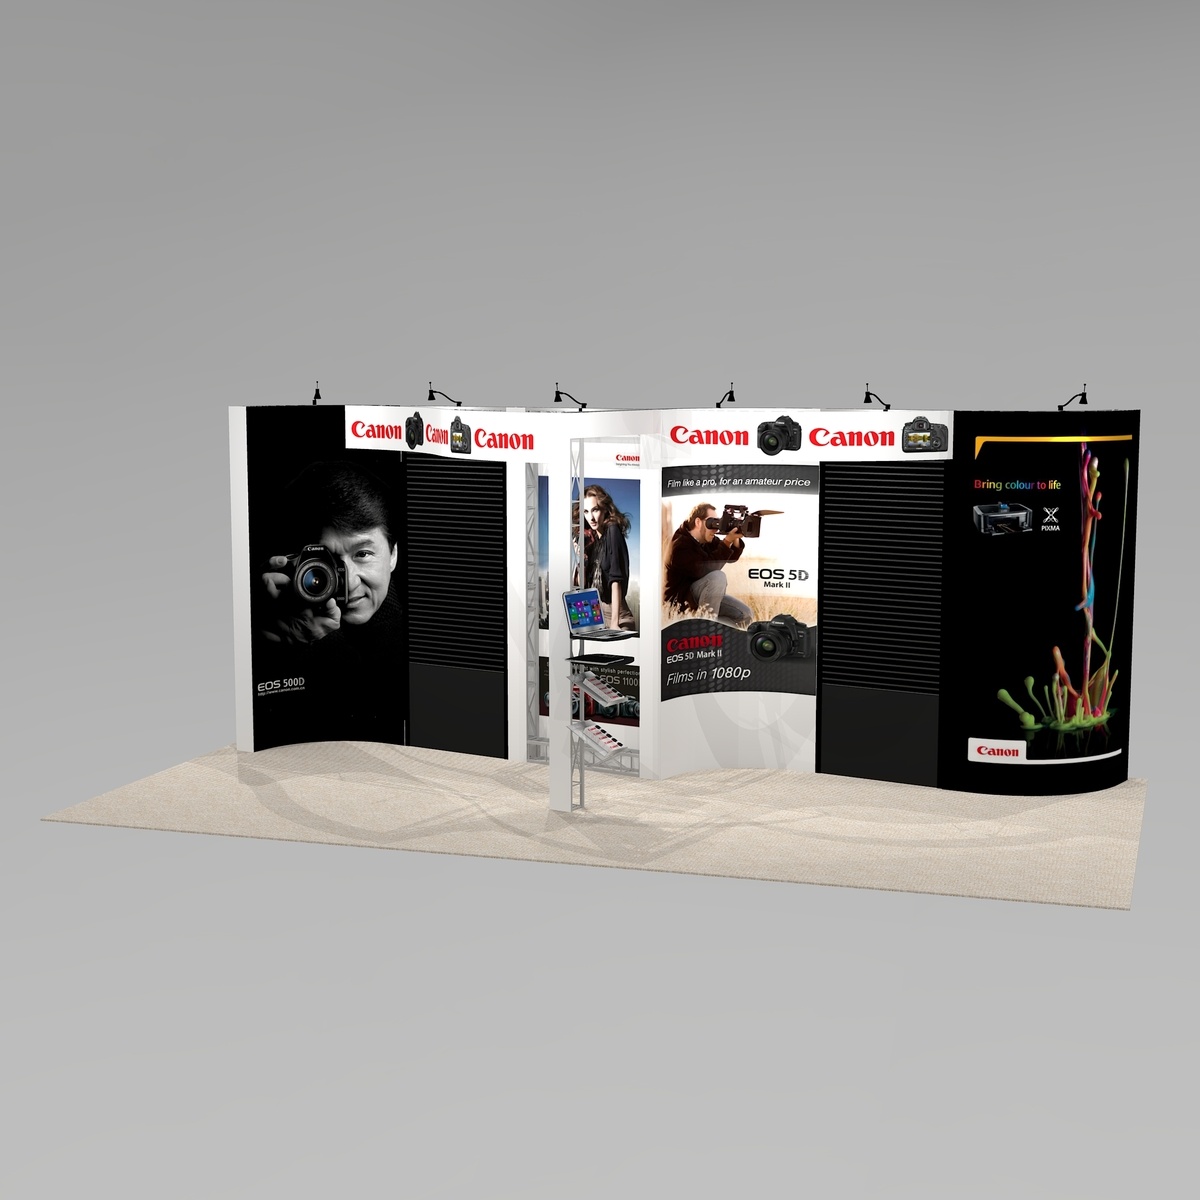 Curved slat wall trade show exhibit design NAP1020 Graphic Package C